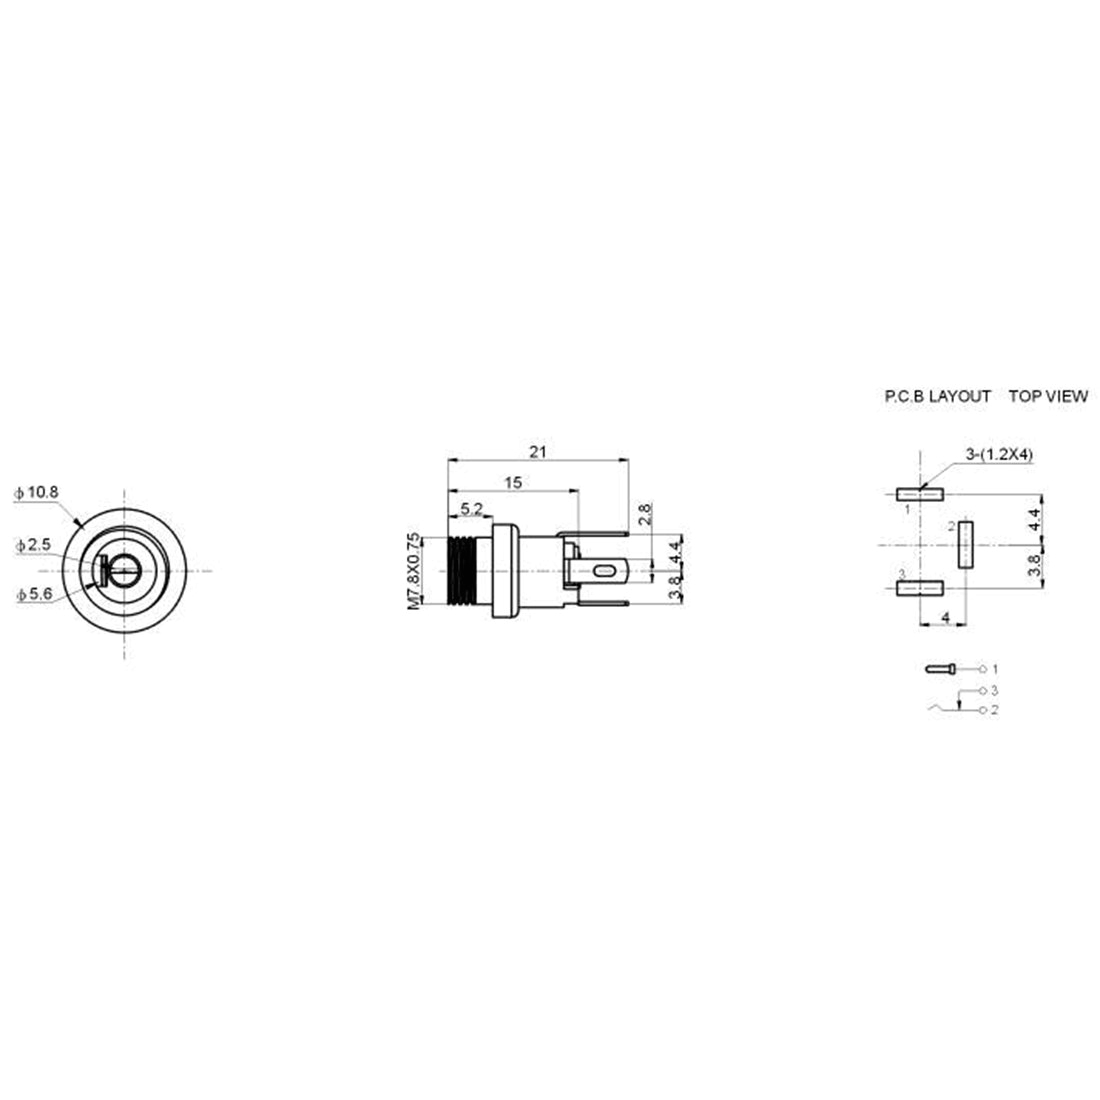 uxcell 55 mm x 21 mm female dc power jack 3 pin wiring diagram